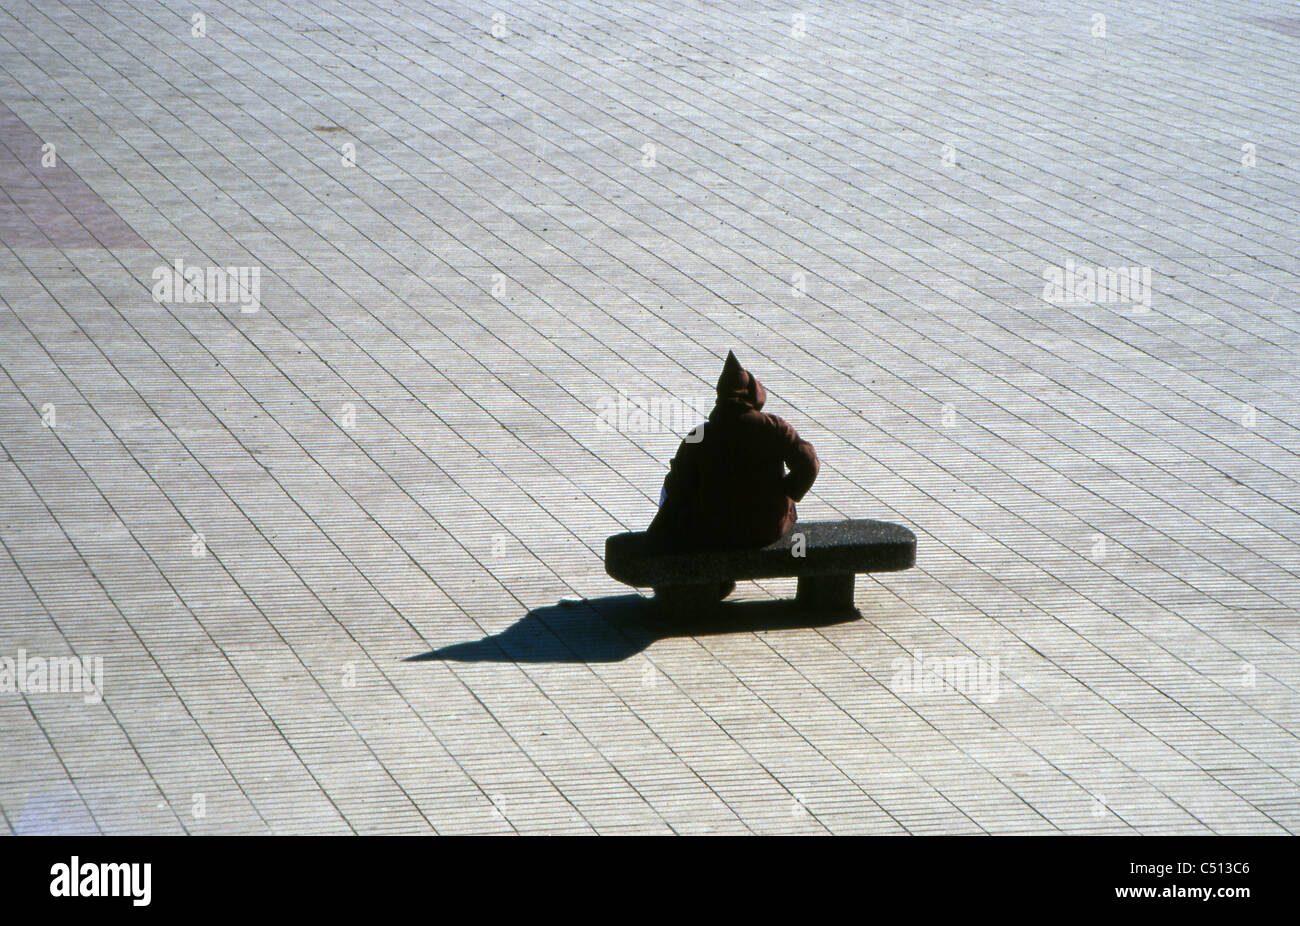 Hooded figure sitting alone on bench Stock Photo